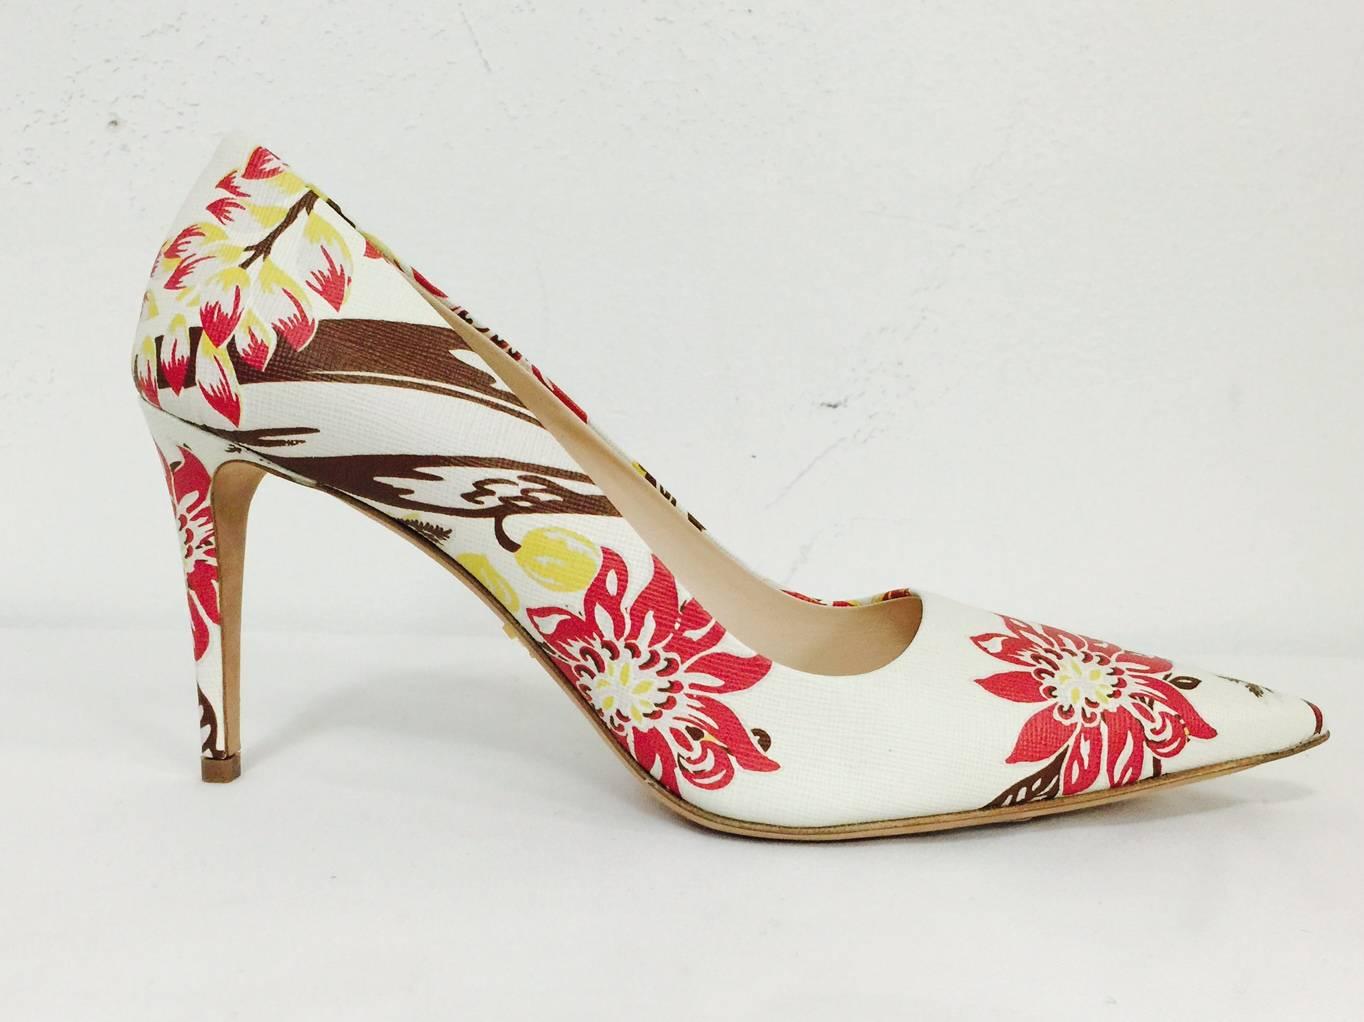 Prada Pointed Toe Pumps take a classic shoe style and amplifies the feminine quotient!  Ivory shoes feature dramatic raspberry, brown, and yellow floral print in Saffiano leather!  Finished with leather soles and insoles.  Made in Italy.  Heel